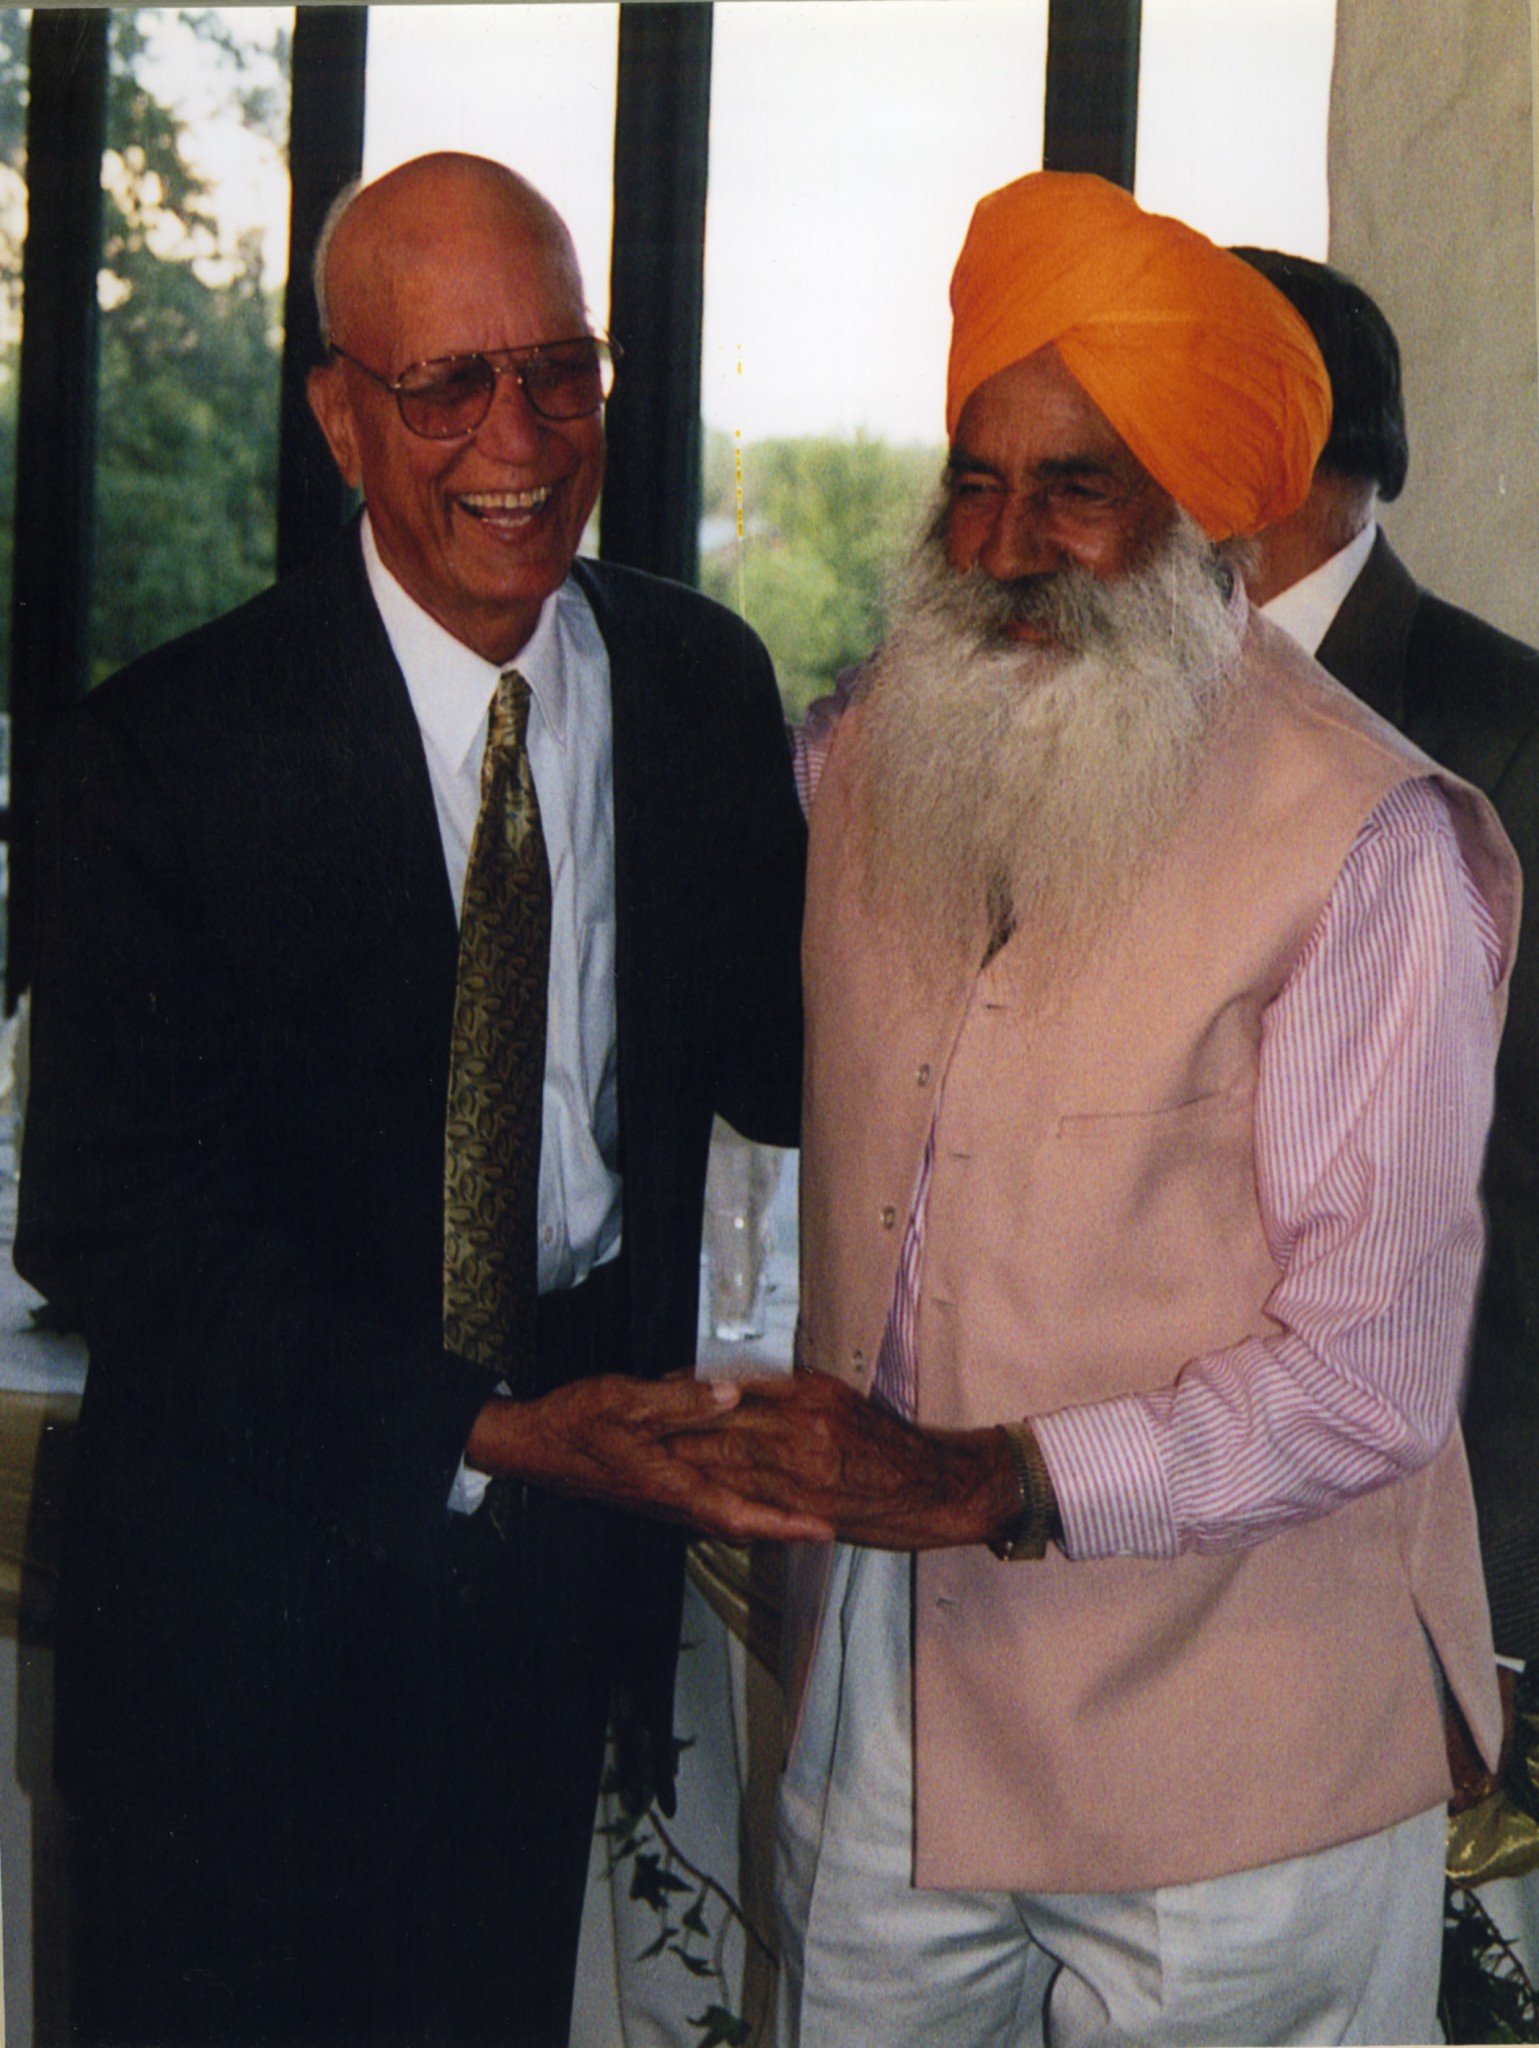 Mehar Singh Tumber and Gurpal Bains. Courtesy of the Bains Family and the Punjabi American Heritage Society.